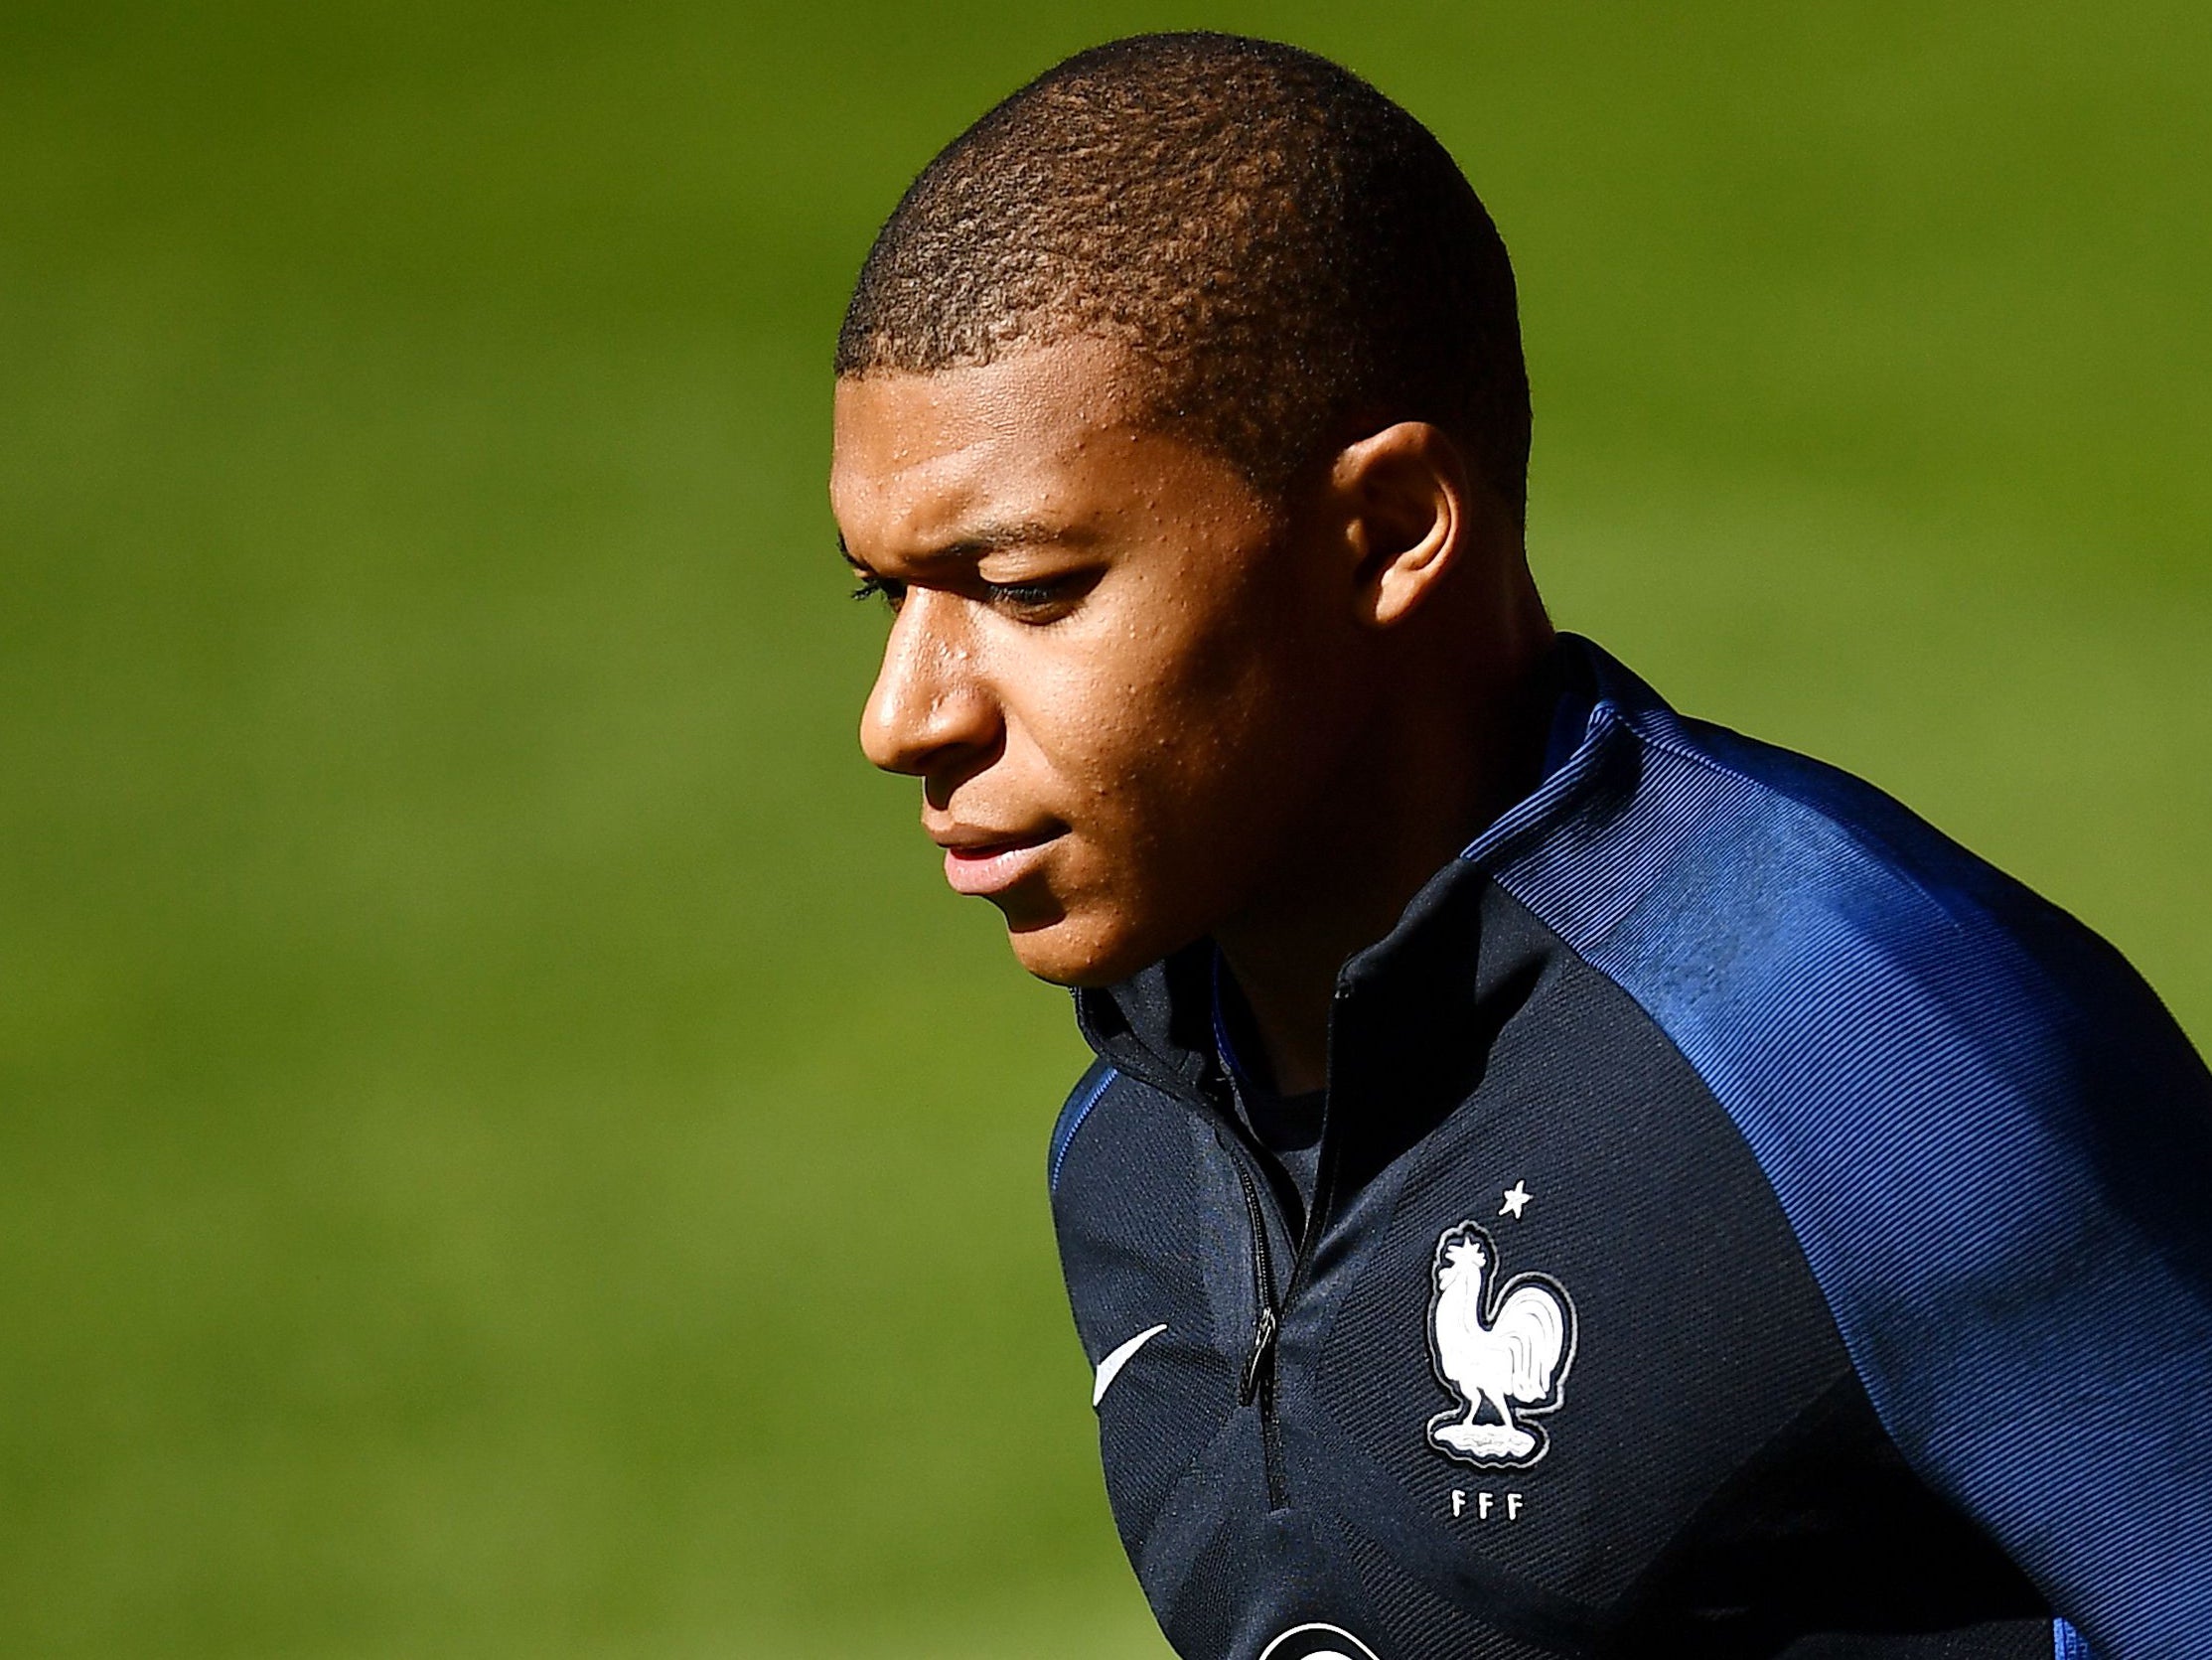 &#13;
Will Mbappe continue to shine or burn out under pressure the expectation? &#13;